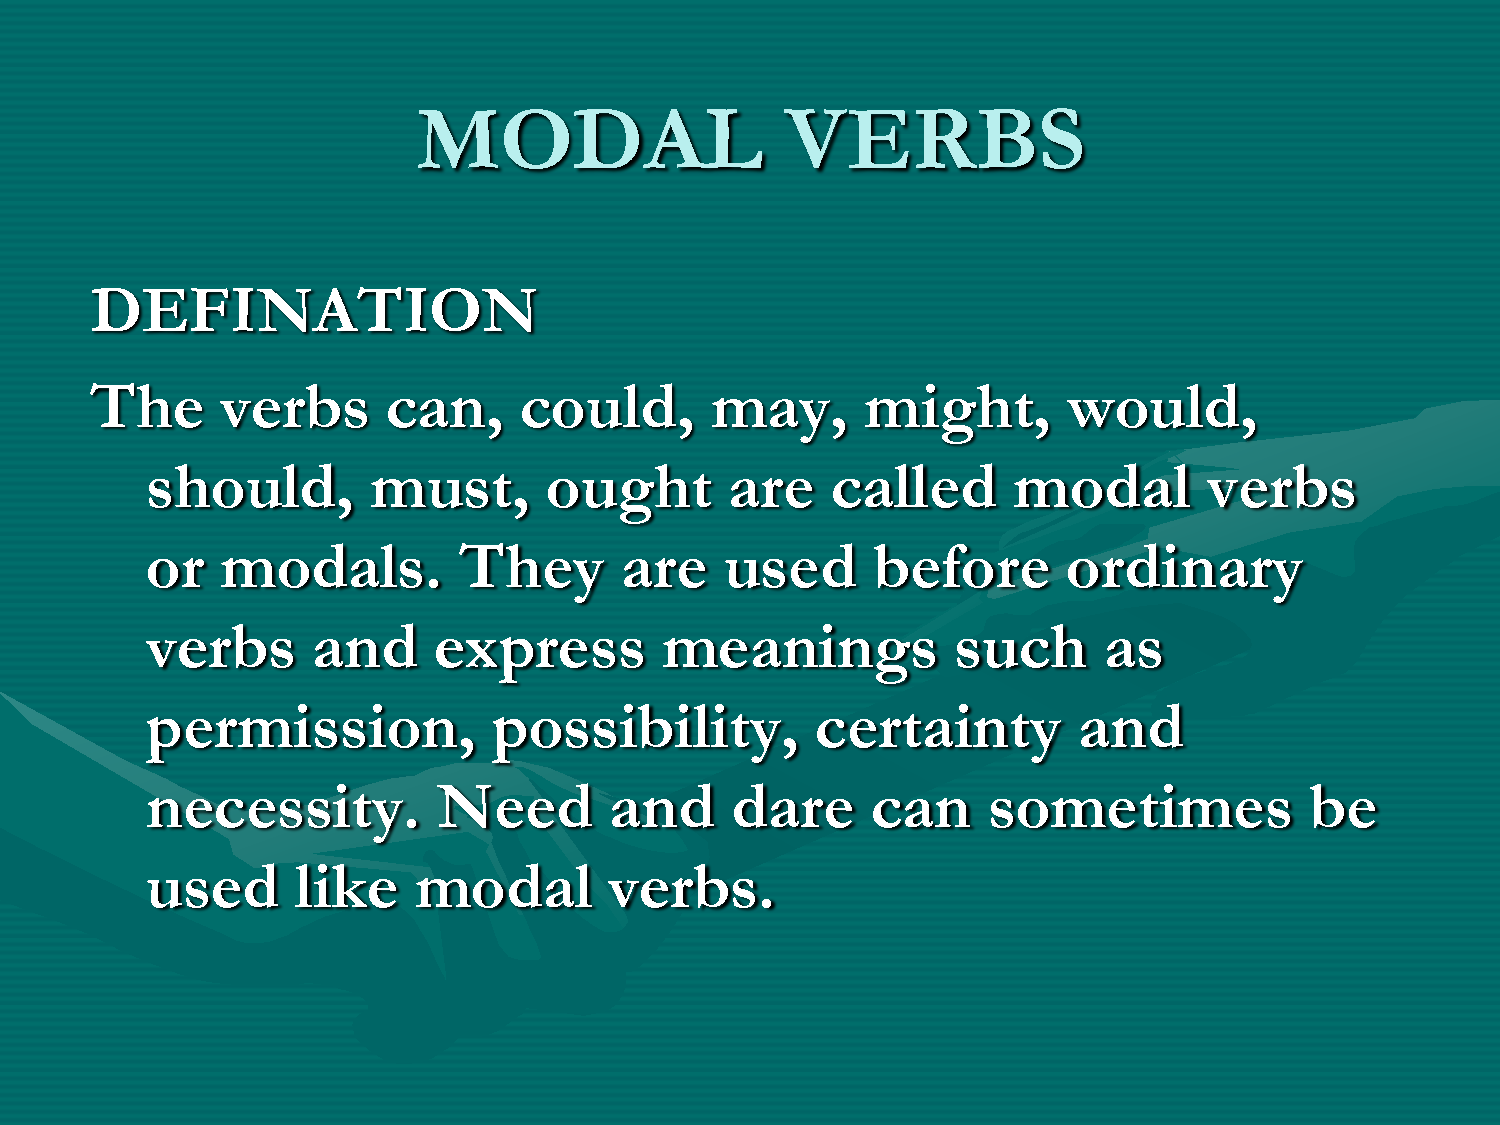 my-english-pages-online-modal-verbs